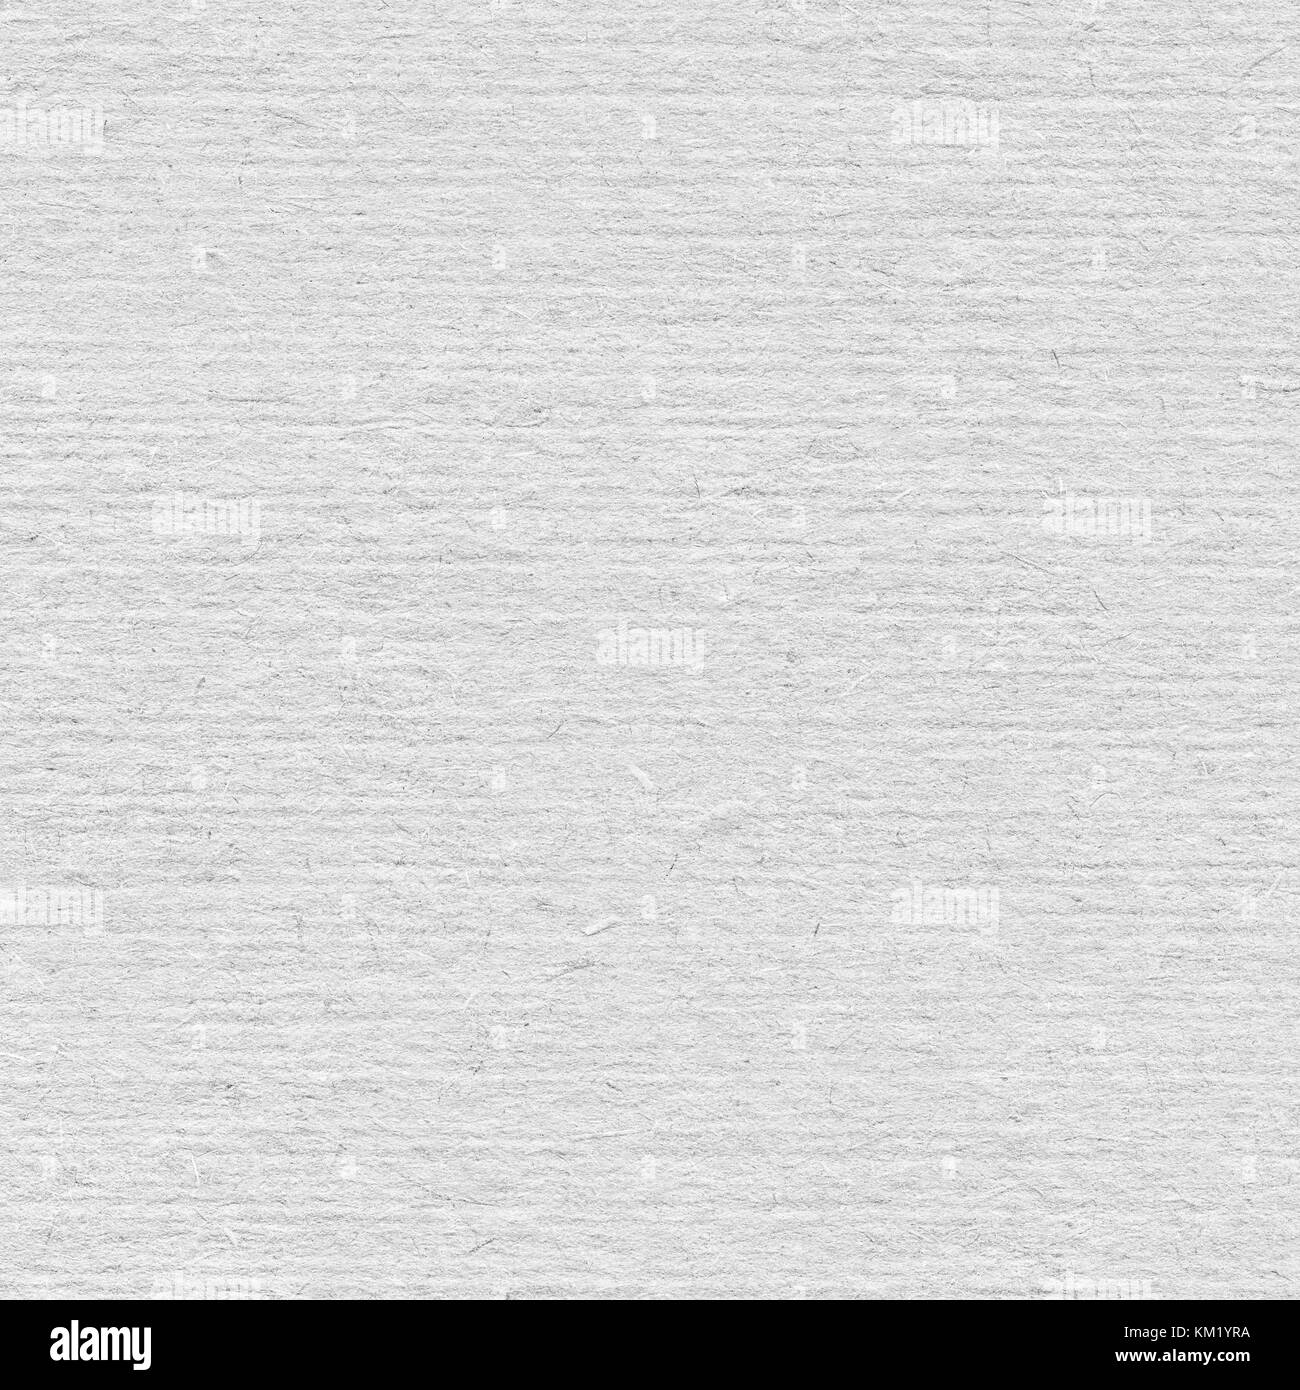 White recycled vertical note paper texture, light background. Stock Photo